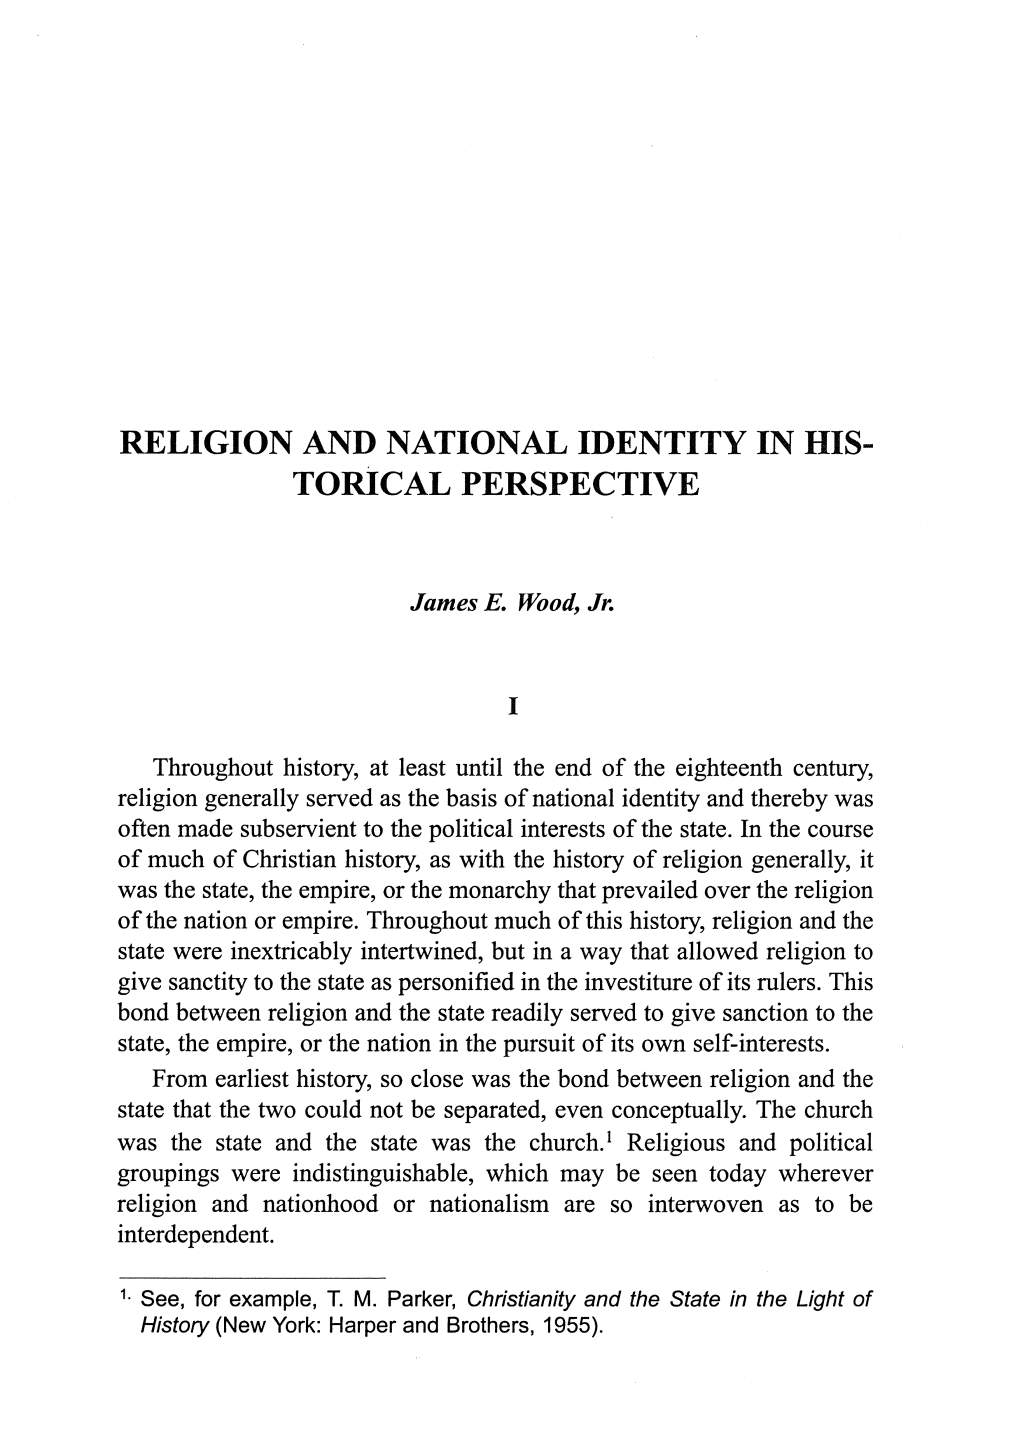 Religion and National Identity in Historical Perspective